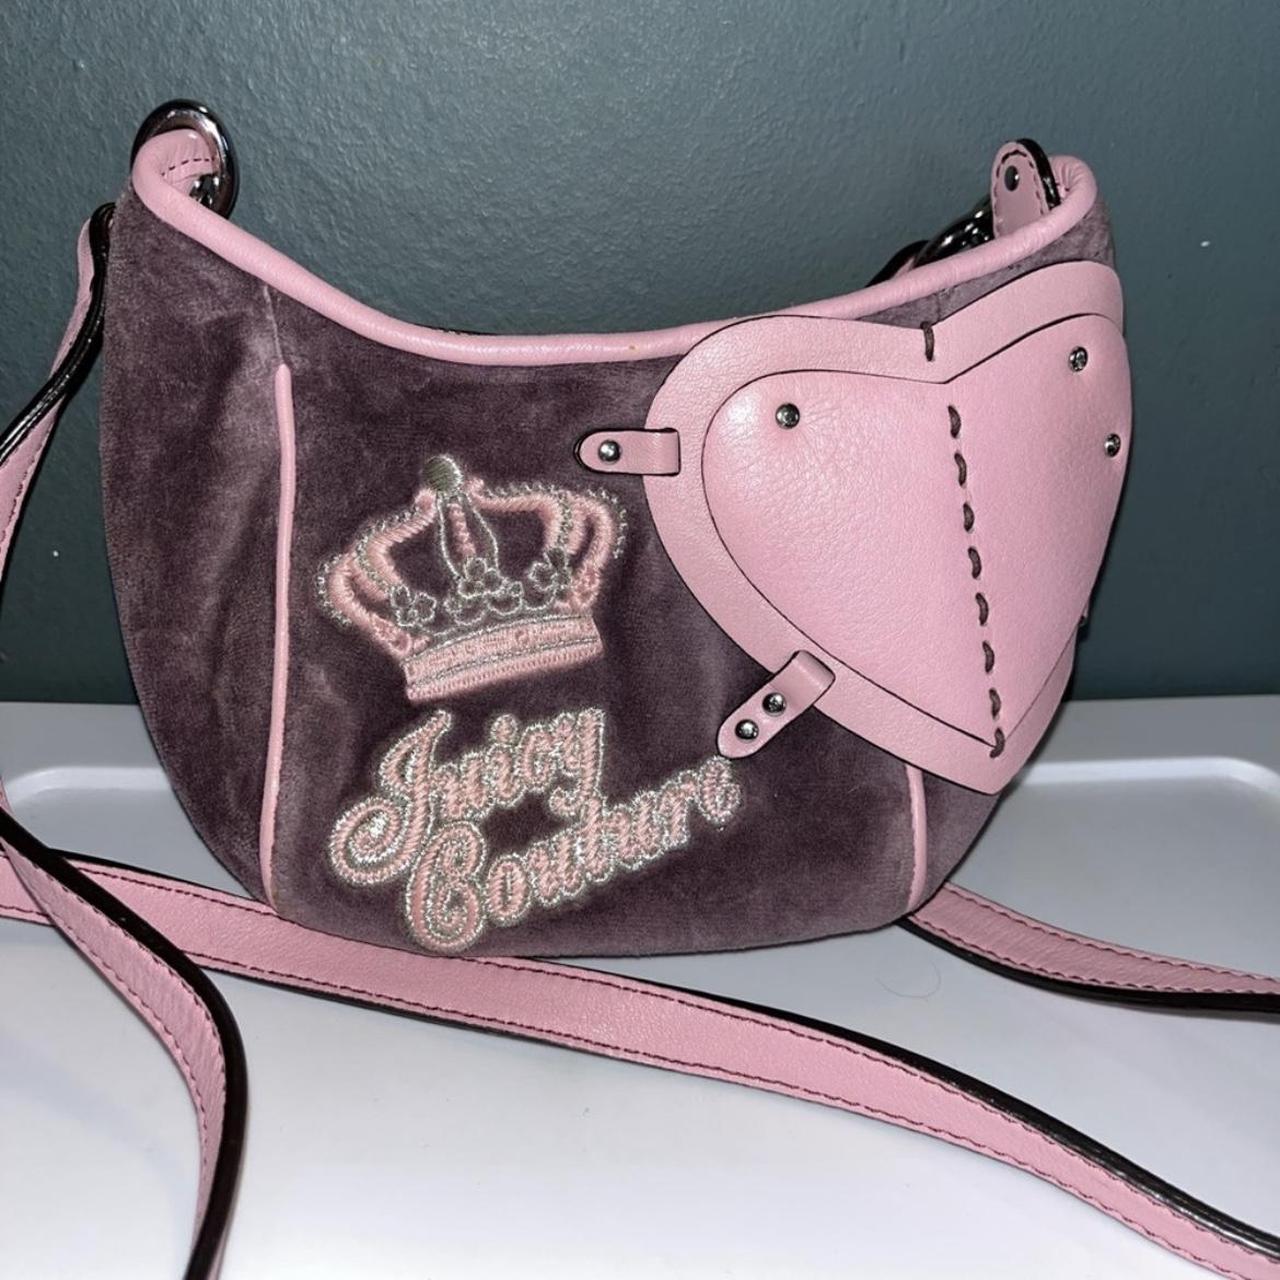 Juicy Couture Purse and wallet | Juicy couture purse, Juicy couture  accessories, Juicy couture